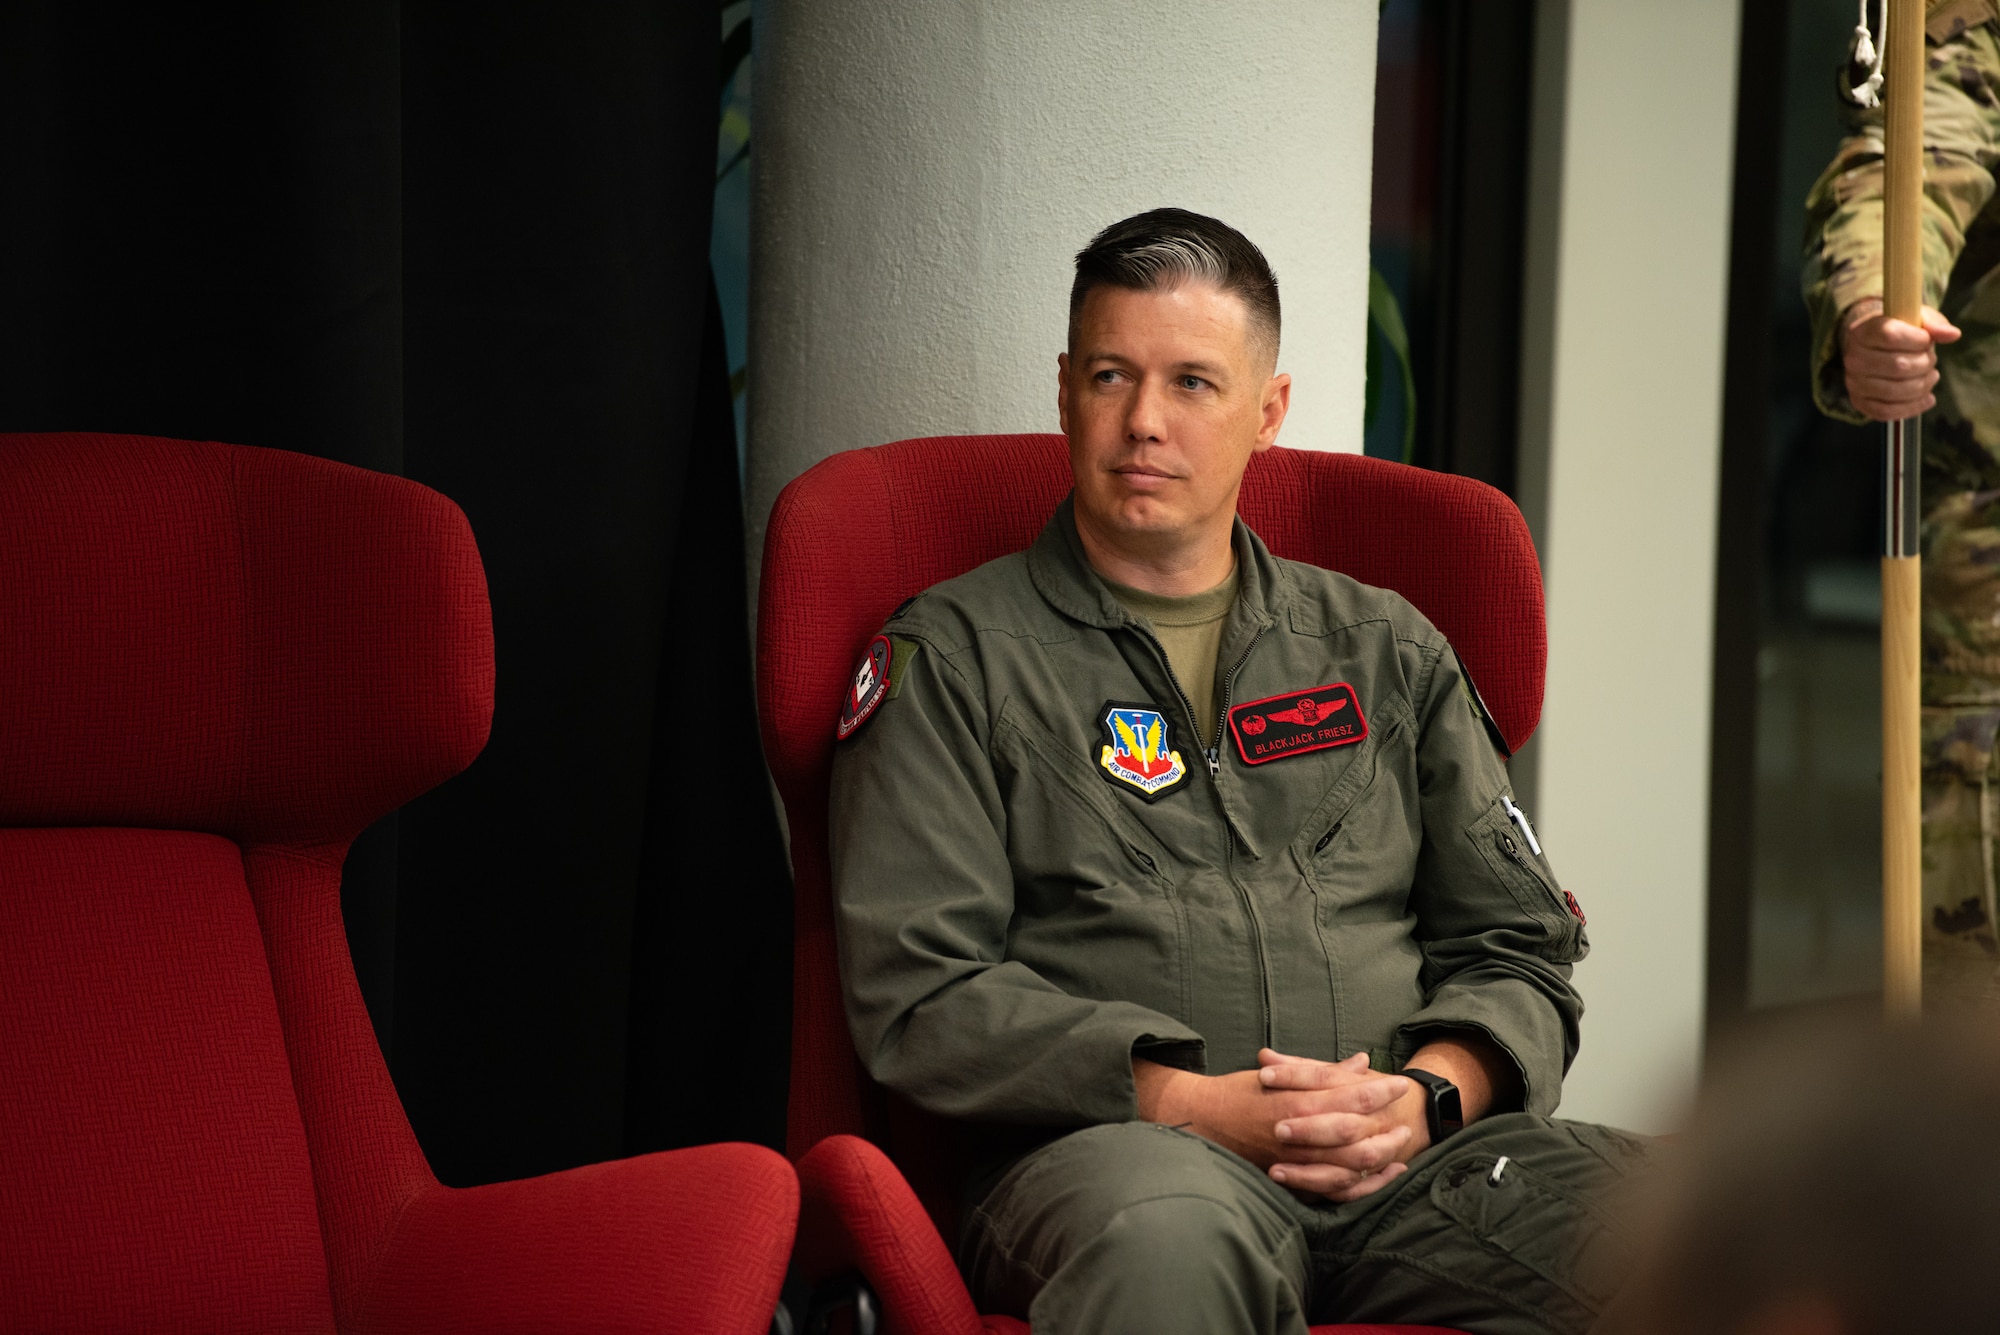 U.S. Air Force Lt. Col. Charles A. Friesz, 563rd Electronic Warfare Squadron commander, listens to opening remarks during the reactivation ceremony for 563rd EWS, San Antonio, Texas, April 25, 2024. Friesz is the first to assume command of this unit since its deactivation in 2010. The squadron previously conducted electronic warfare and combat system officer training before it was deactivated in 2010 but will now perform software development in support of the Air Force’s electromagnetic warfare operations. (U.S. Air Force photo by Jarrod M. Vickers)